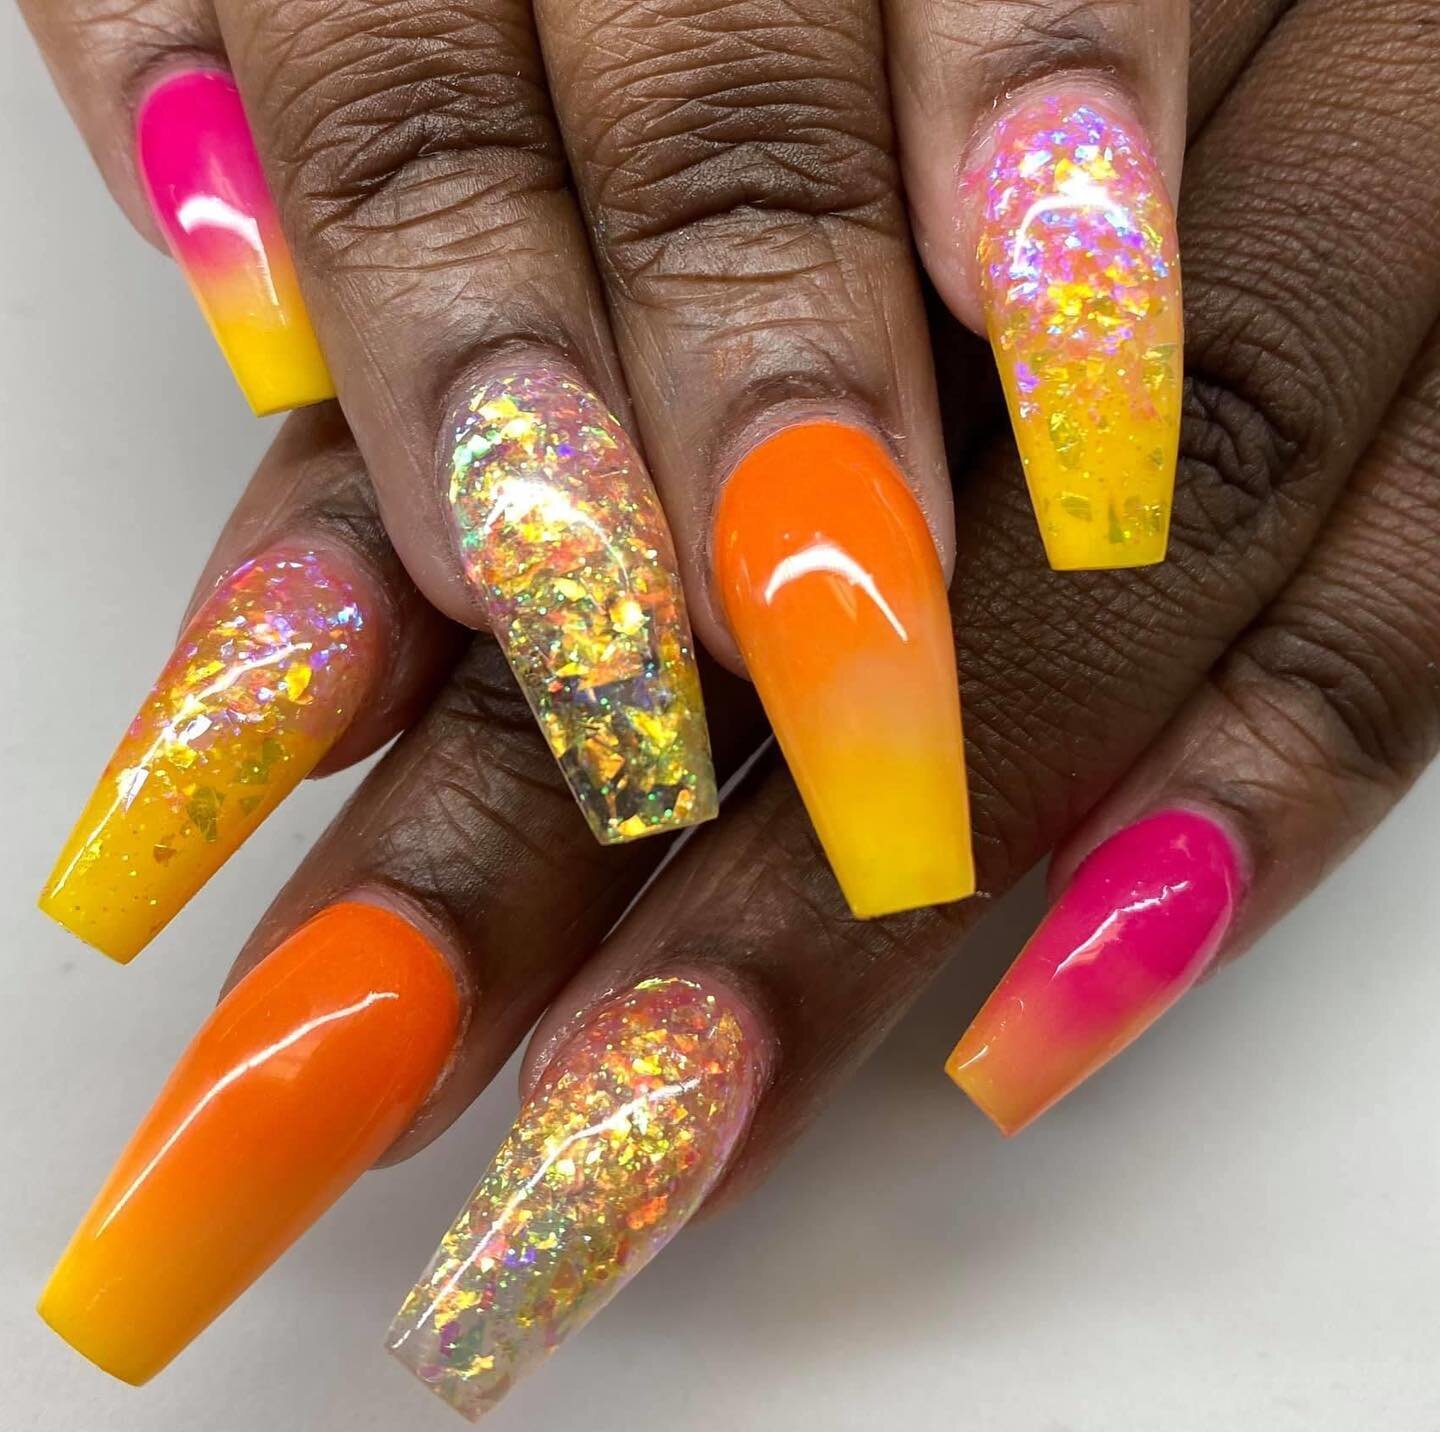 https://sivaboutiqueandnailbar.as.me/ #ombrenails #coffinnails #nailsnailsnails #nailsoftheday #nailartaddict #appointmentsonly #valentinobeautypure #supportlocal #supportsmallbusiness #homewood #homewoodal #SivaBoutique #SivaBoutiqueAndNailBar